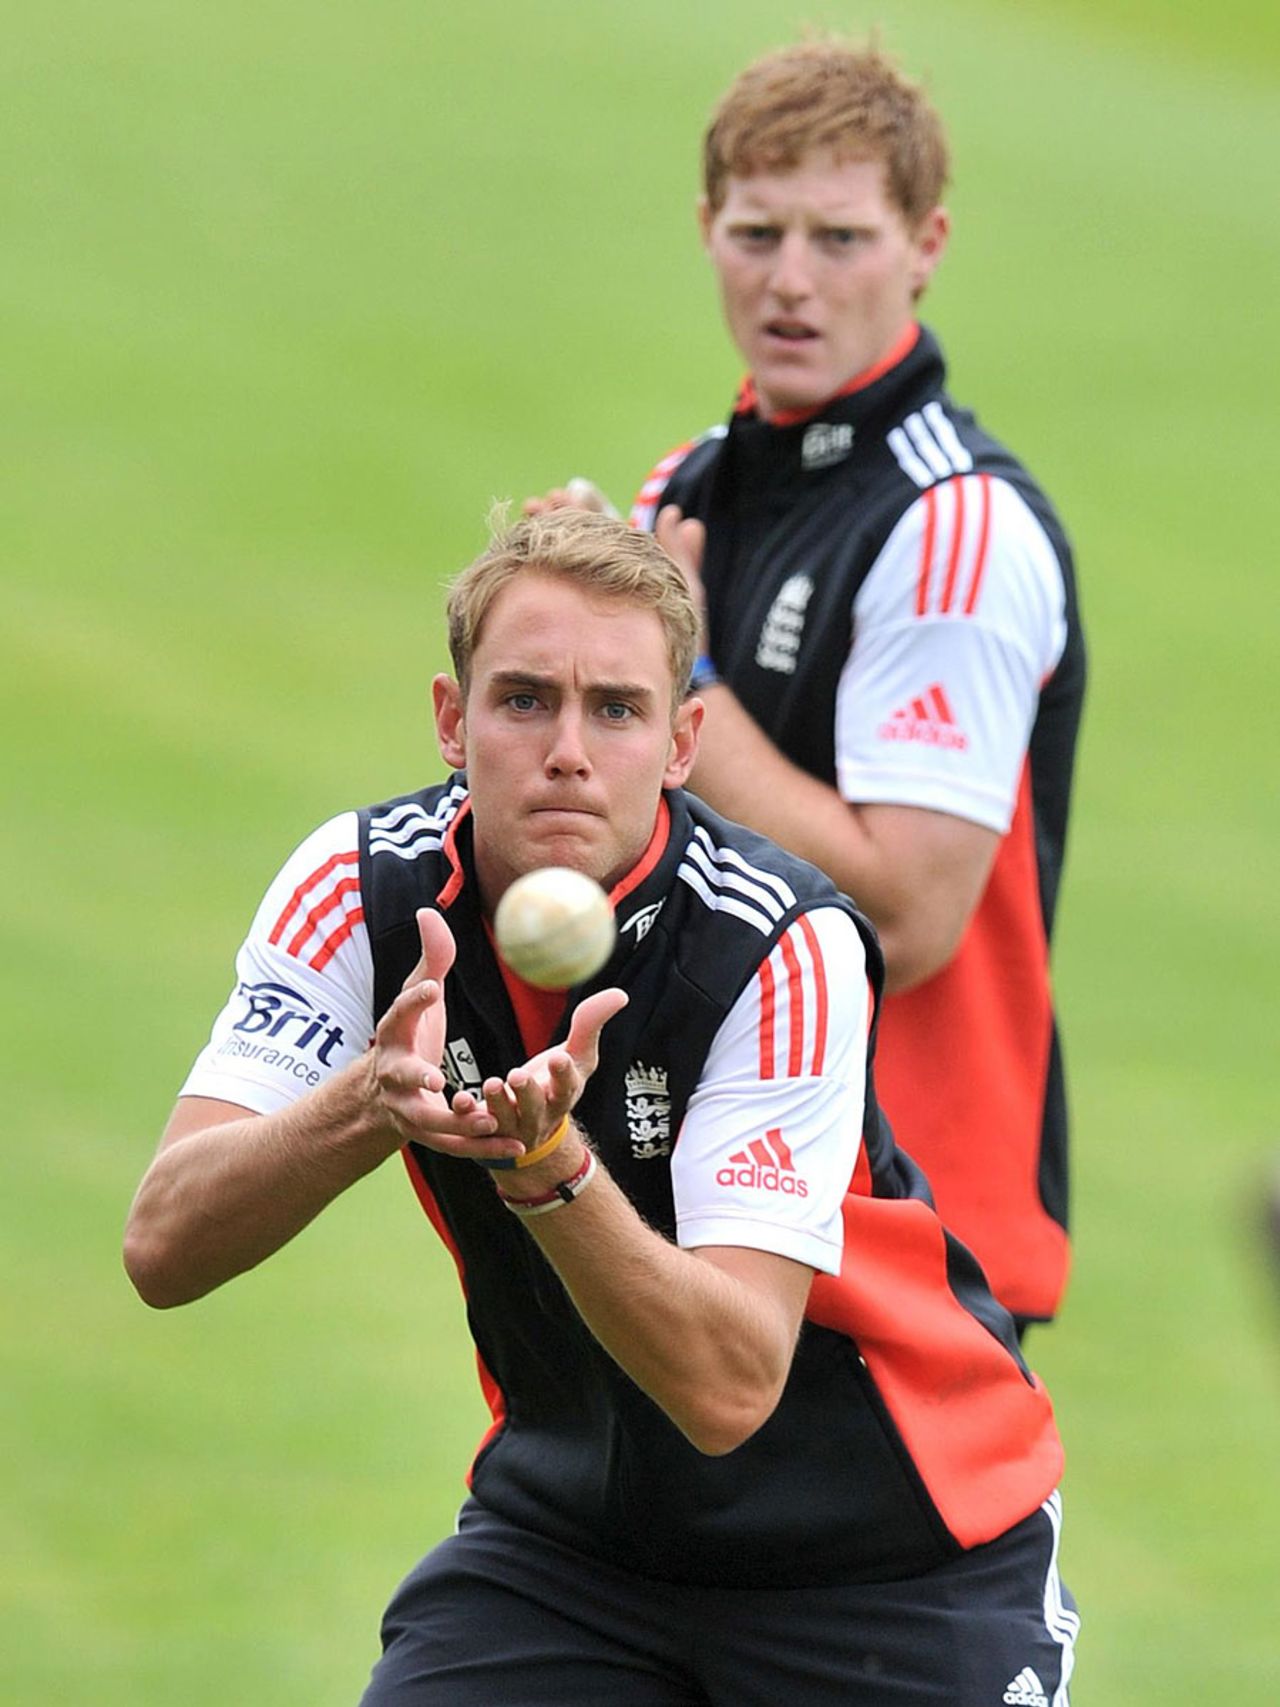 Stuart Broad goes through fielding drills with Ben Stokes in the background, Old Trafford, August 30, 2011